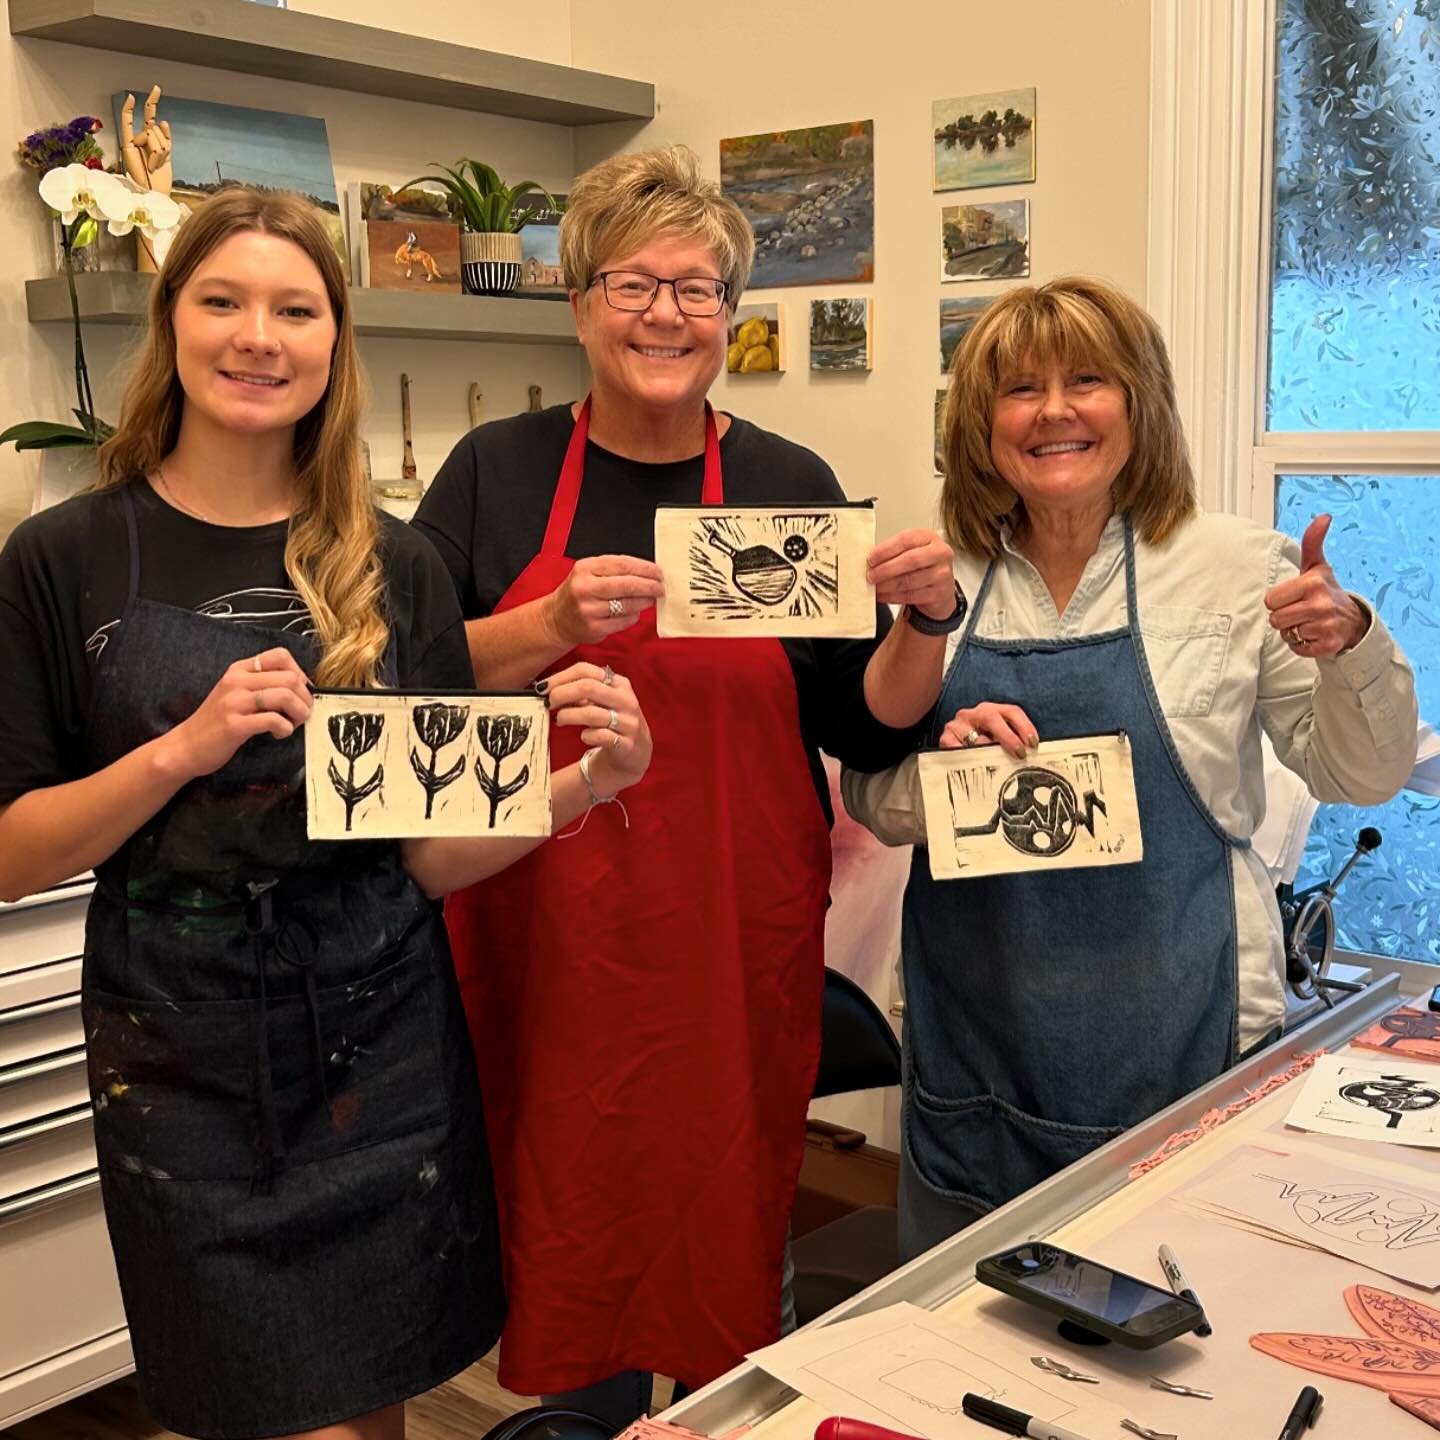 Old &amp; new friends trying new things! This is my jam!

We had such a fun time designing these personal pencil bags. Thank you @barrireeveswhitten for requesting a custom and private printmaking class!

What would you design? 

#madisoncowanstudio 